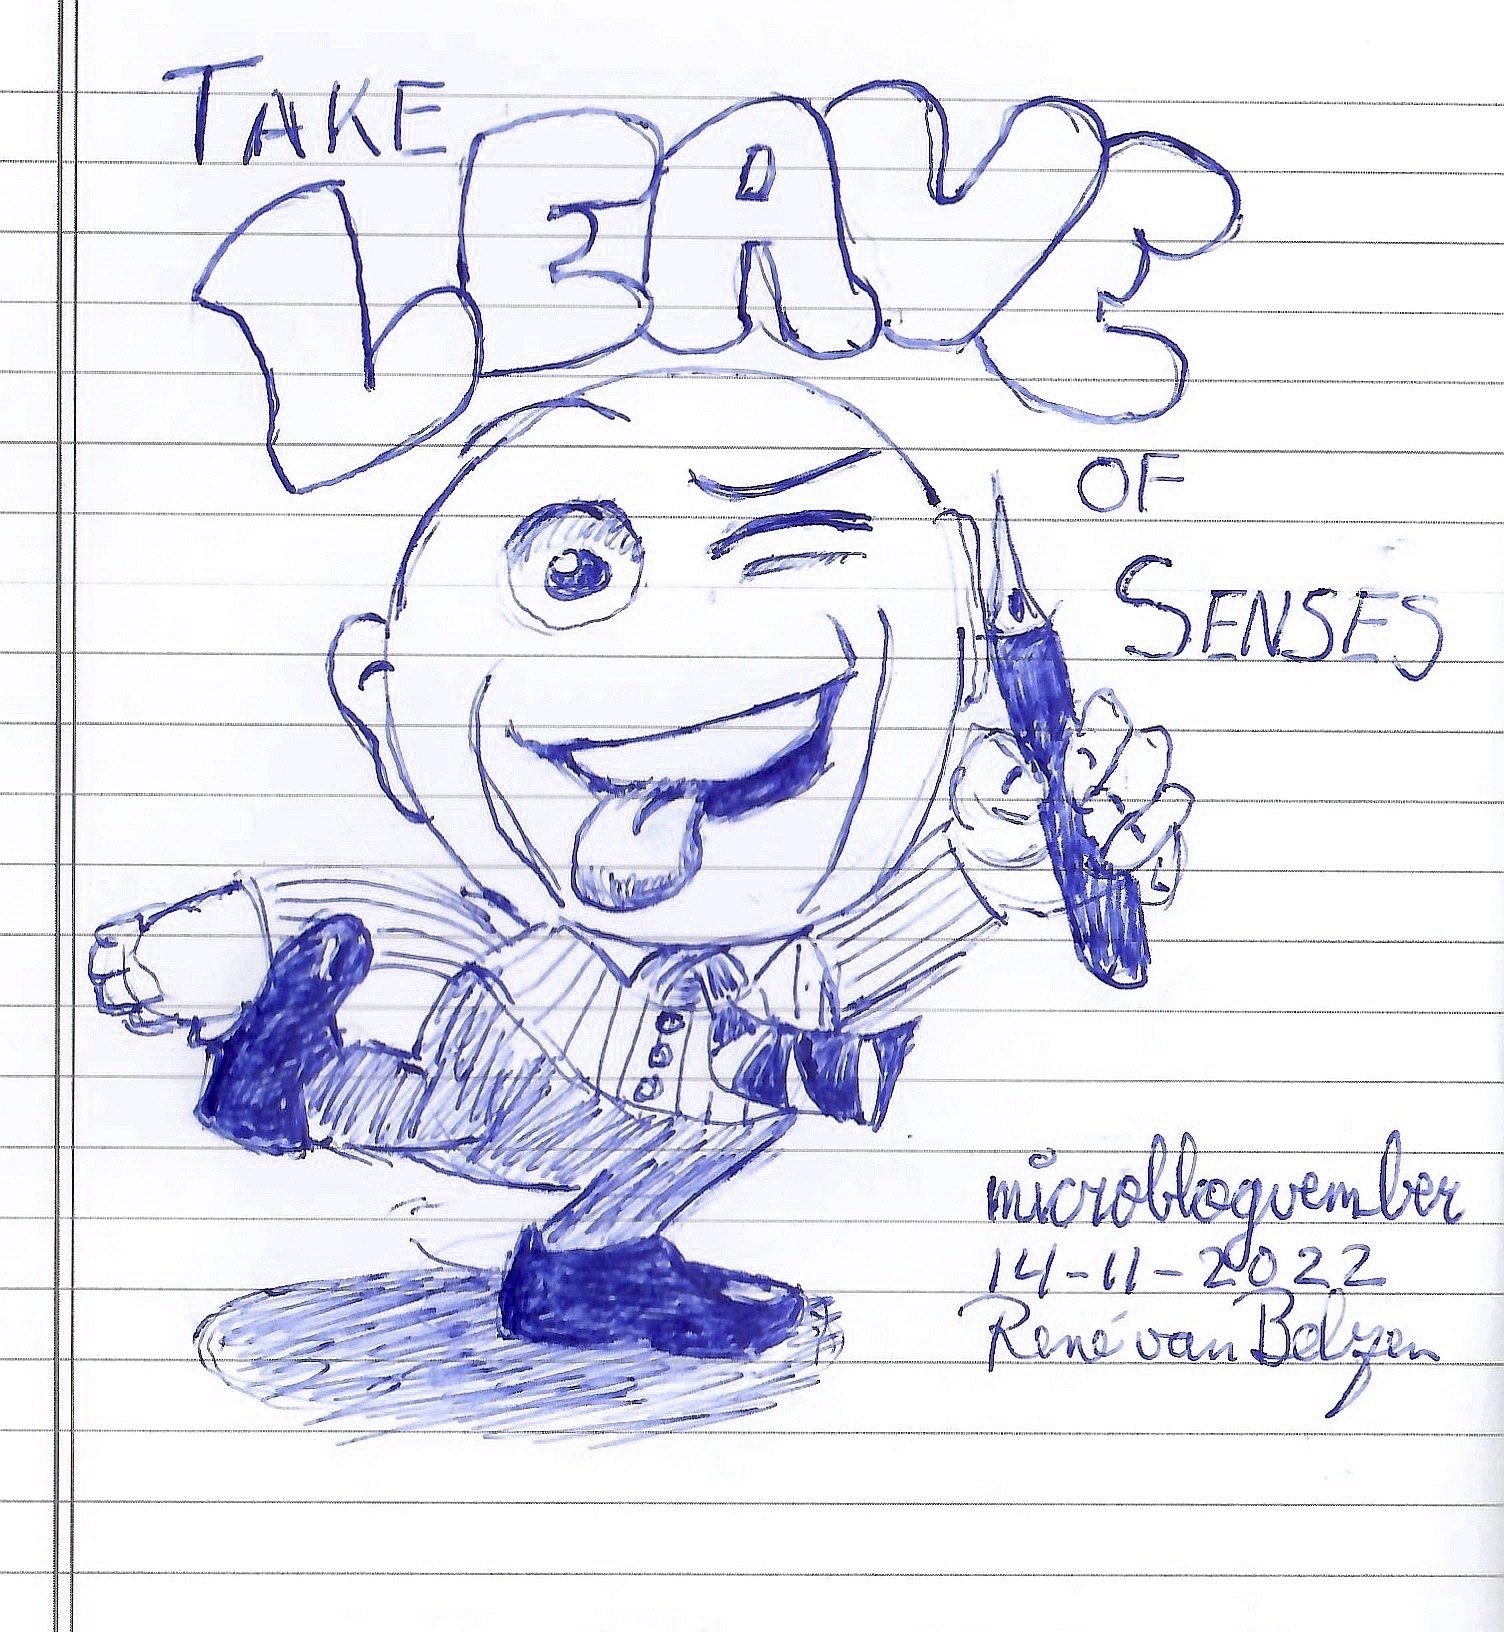 ballpoint sketch of a cartoon figure doing silly with a fountain pen in its hand